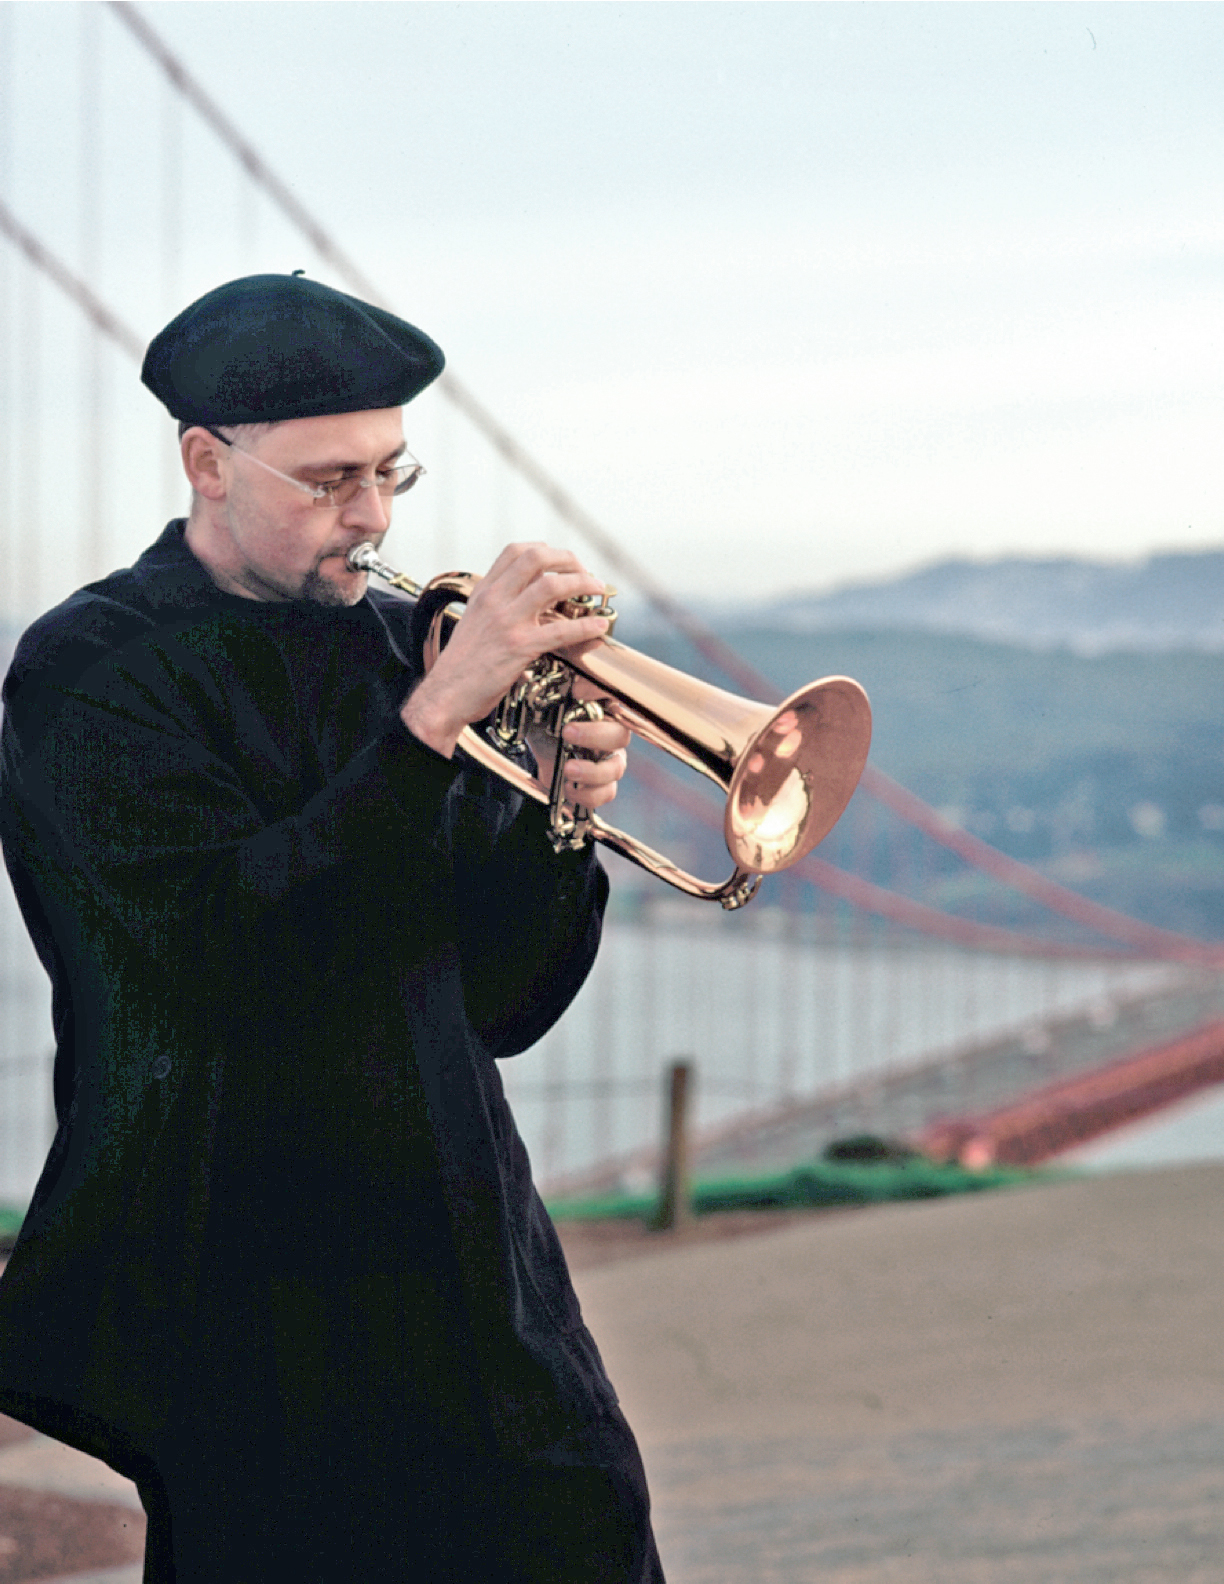 Jazz musician Dmitri Matheny will present a workshop at the Port Angeles campus of Peninsula College today. (dmitrimatheny.com)